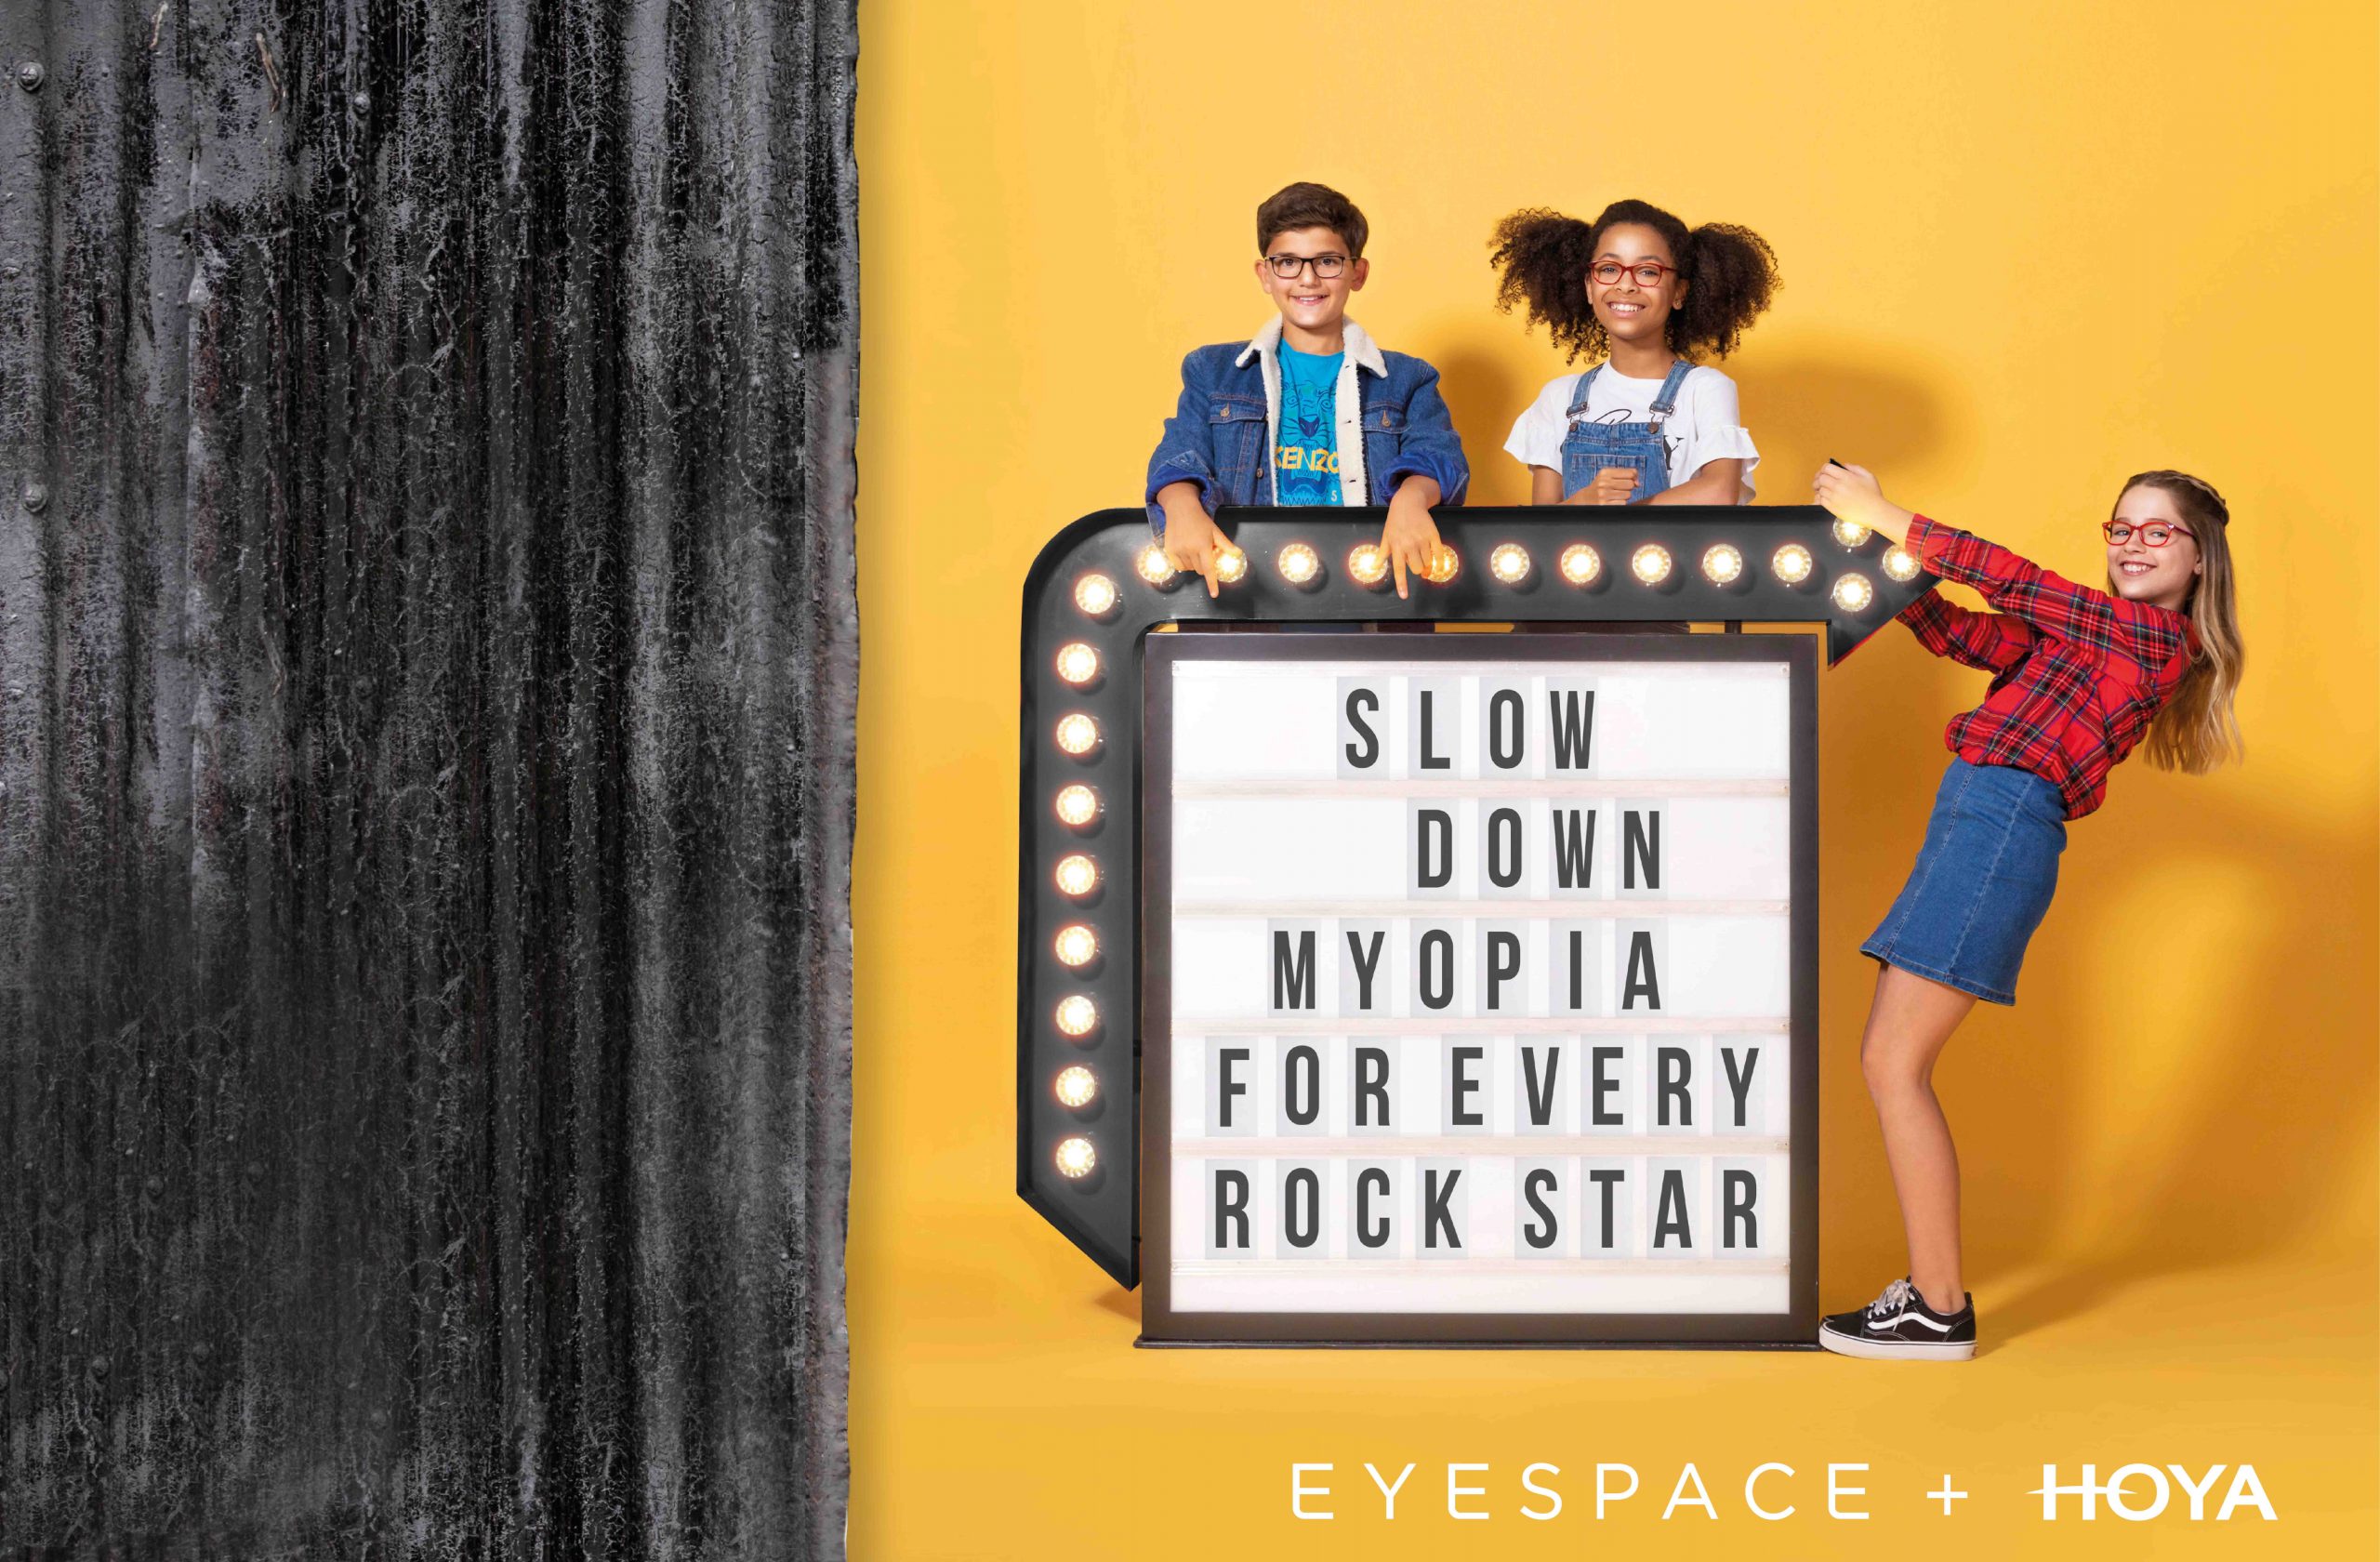 image saying: slow down myopia for every rock star